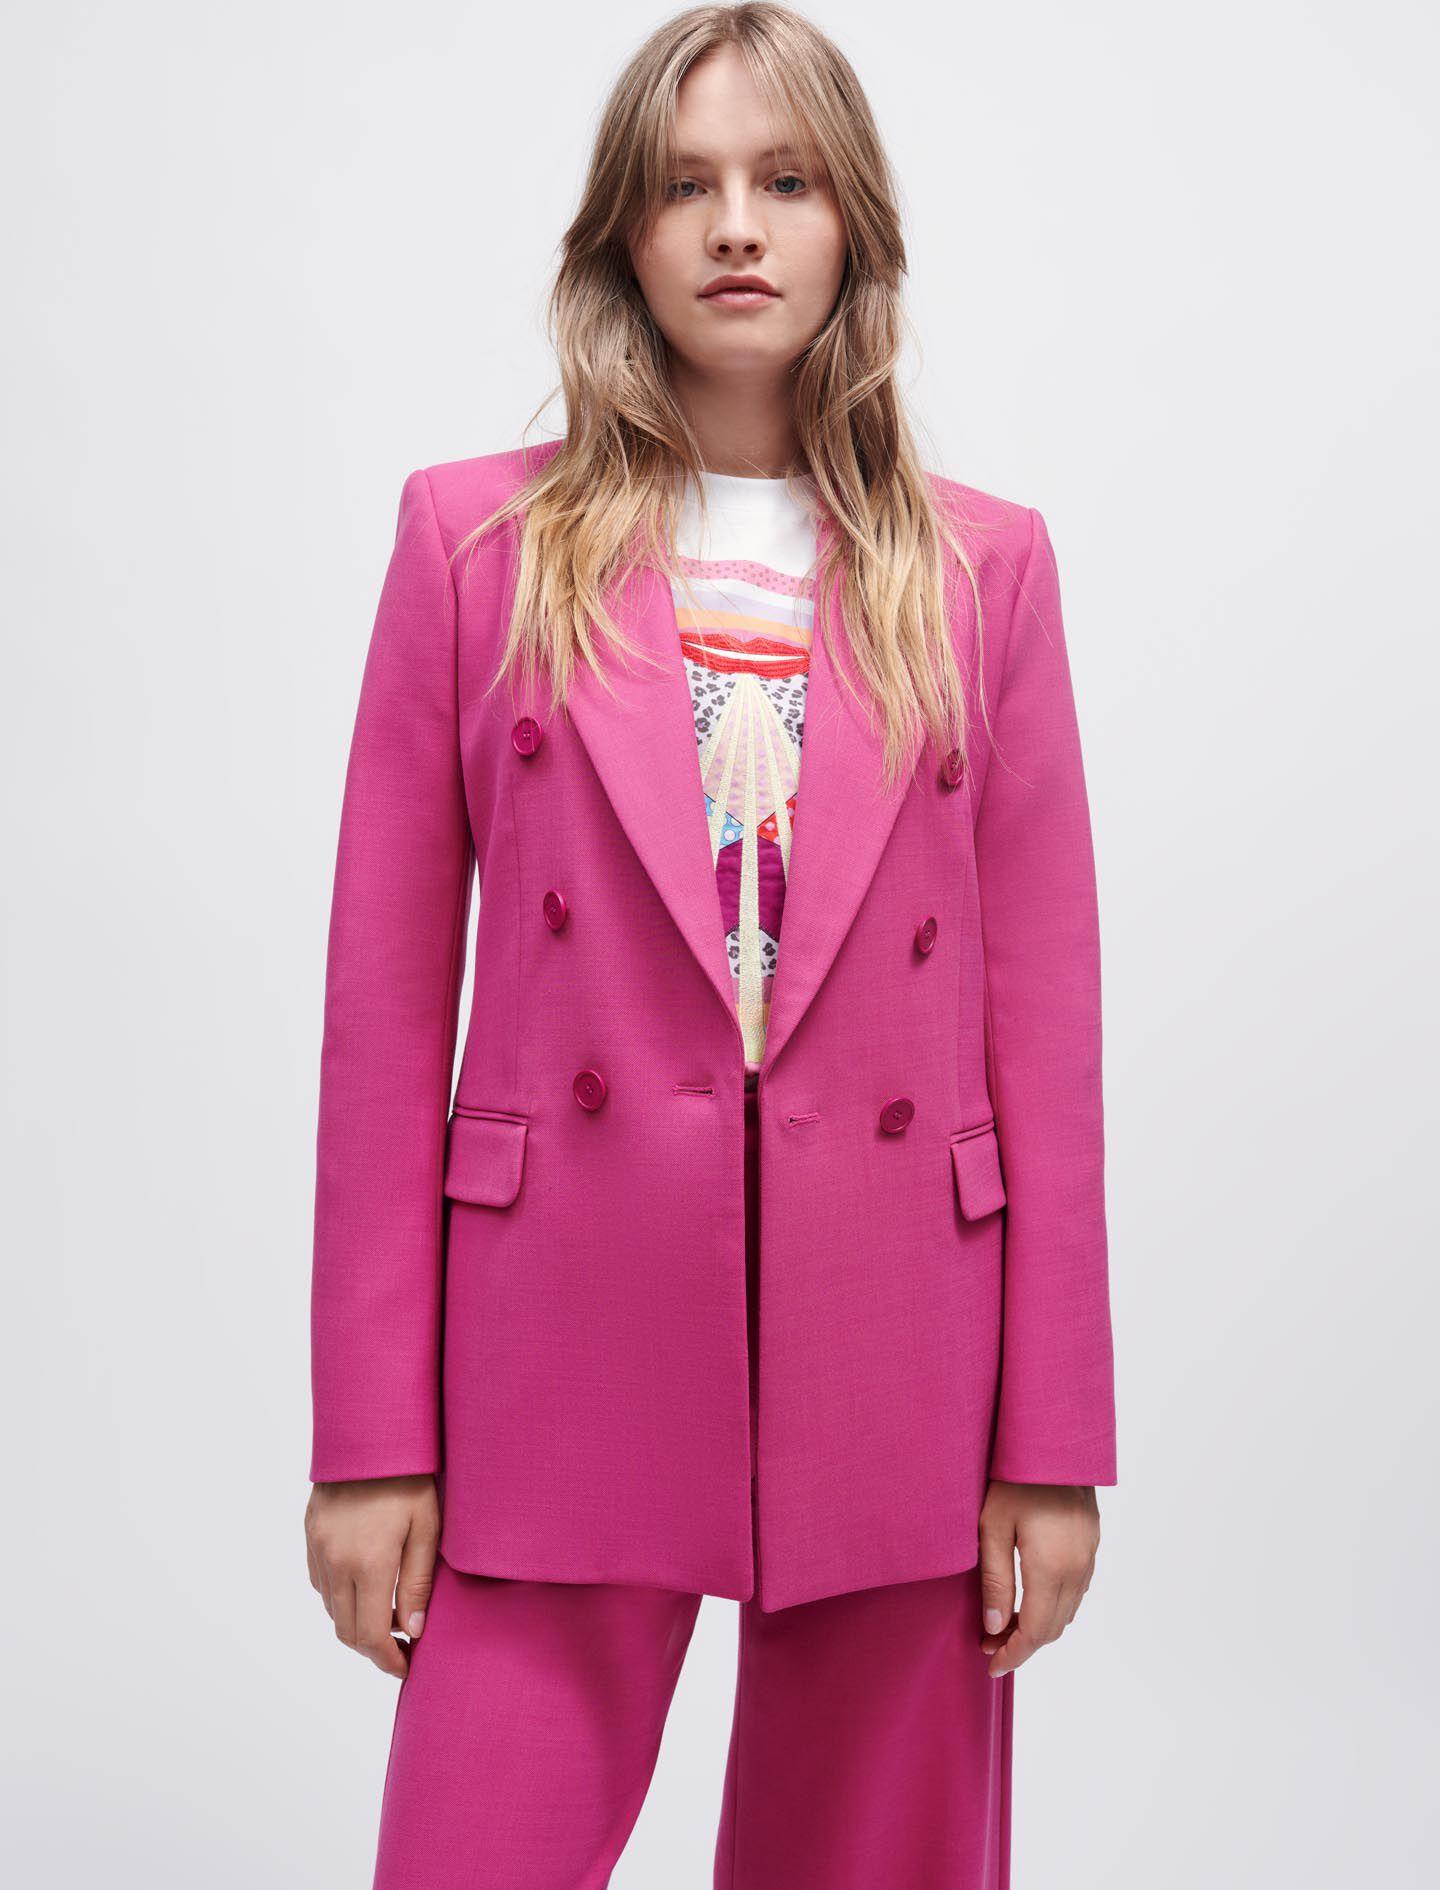 Maje Stretch Double-breasted Suit Jacket in Pink | Lyst